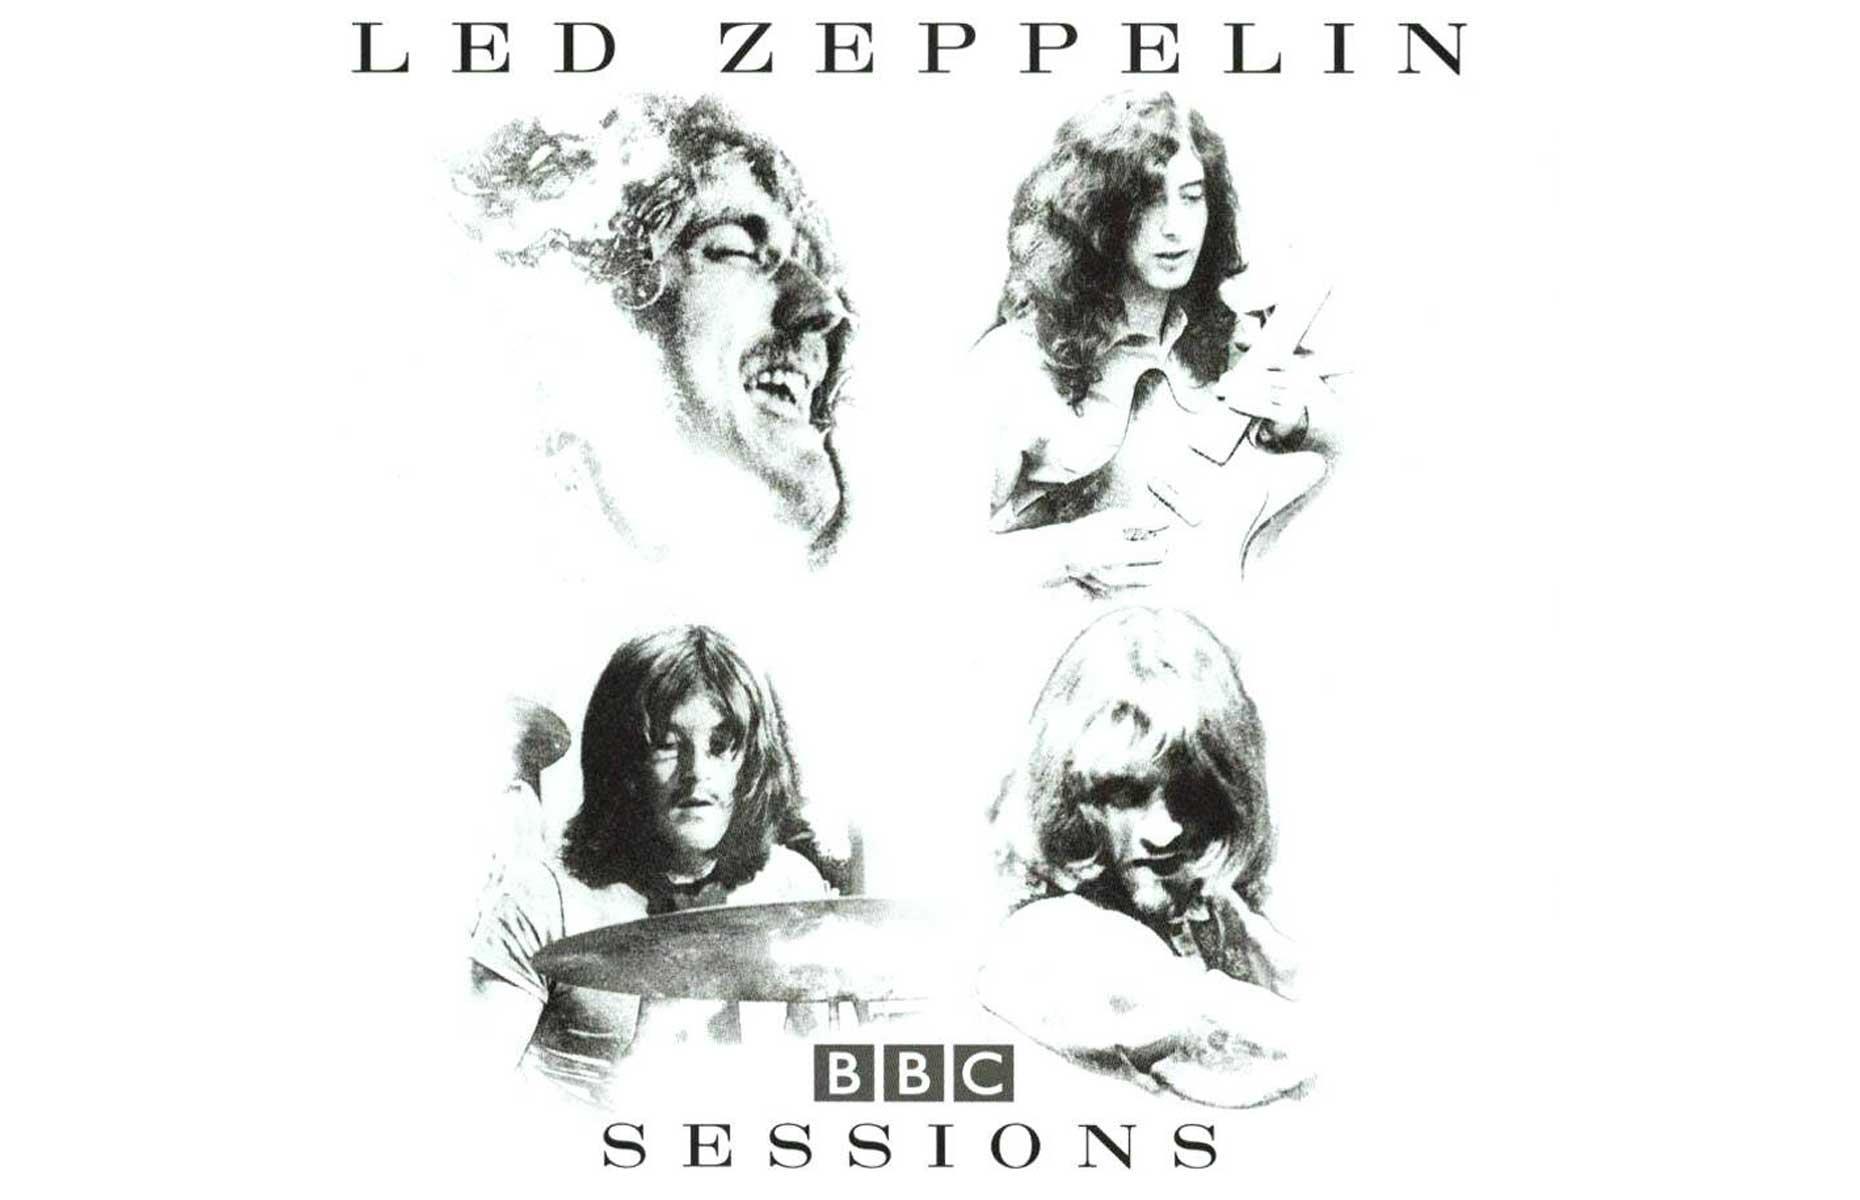 Led Zeppelin – BBC Sessions: up to £700